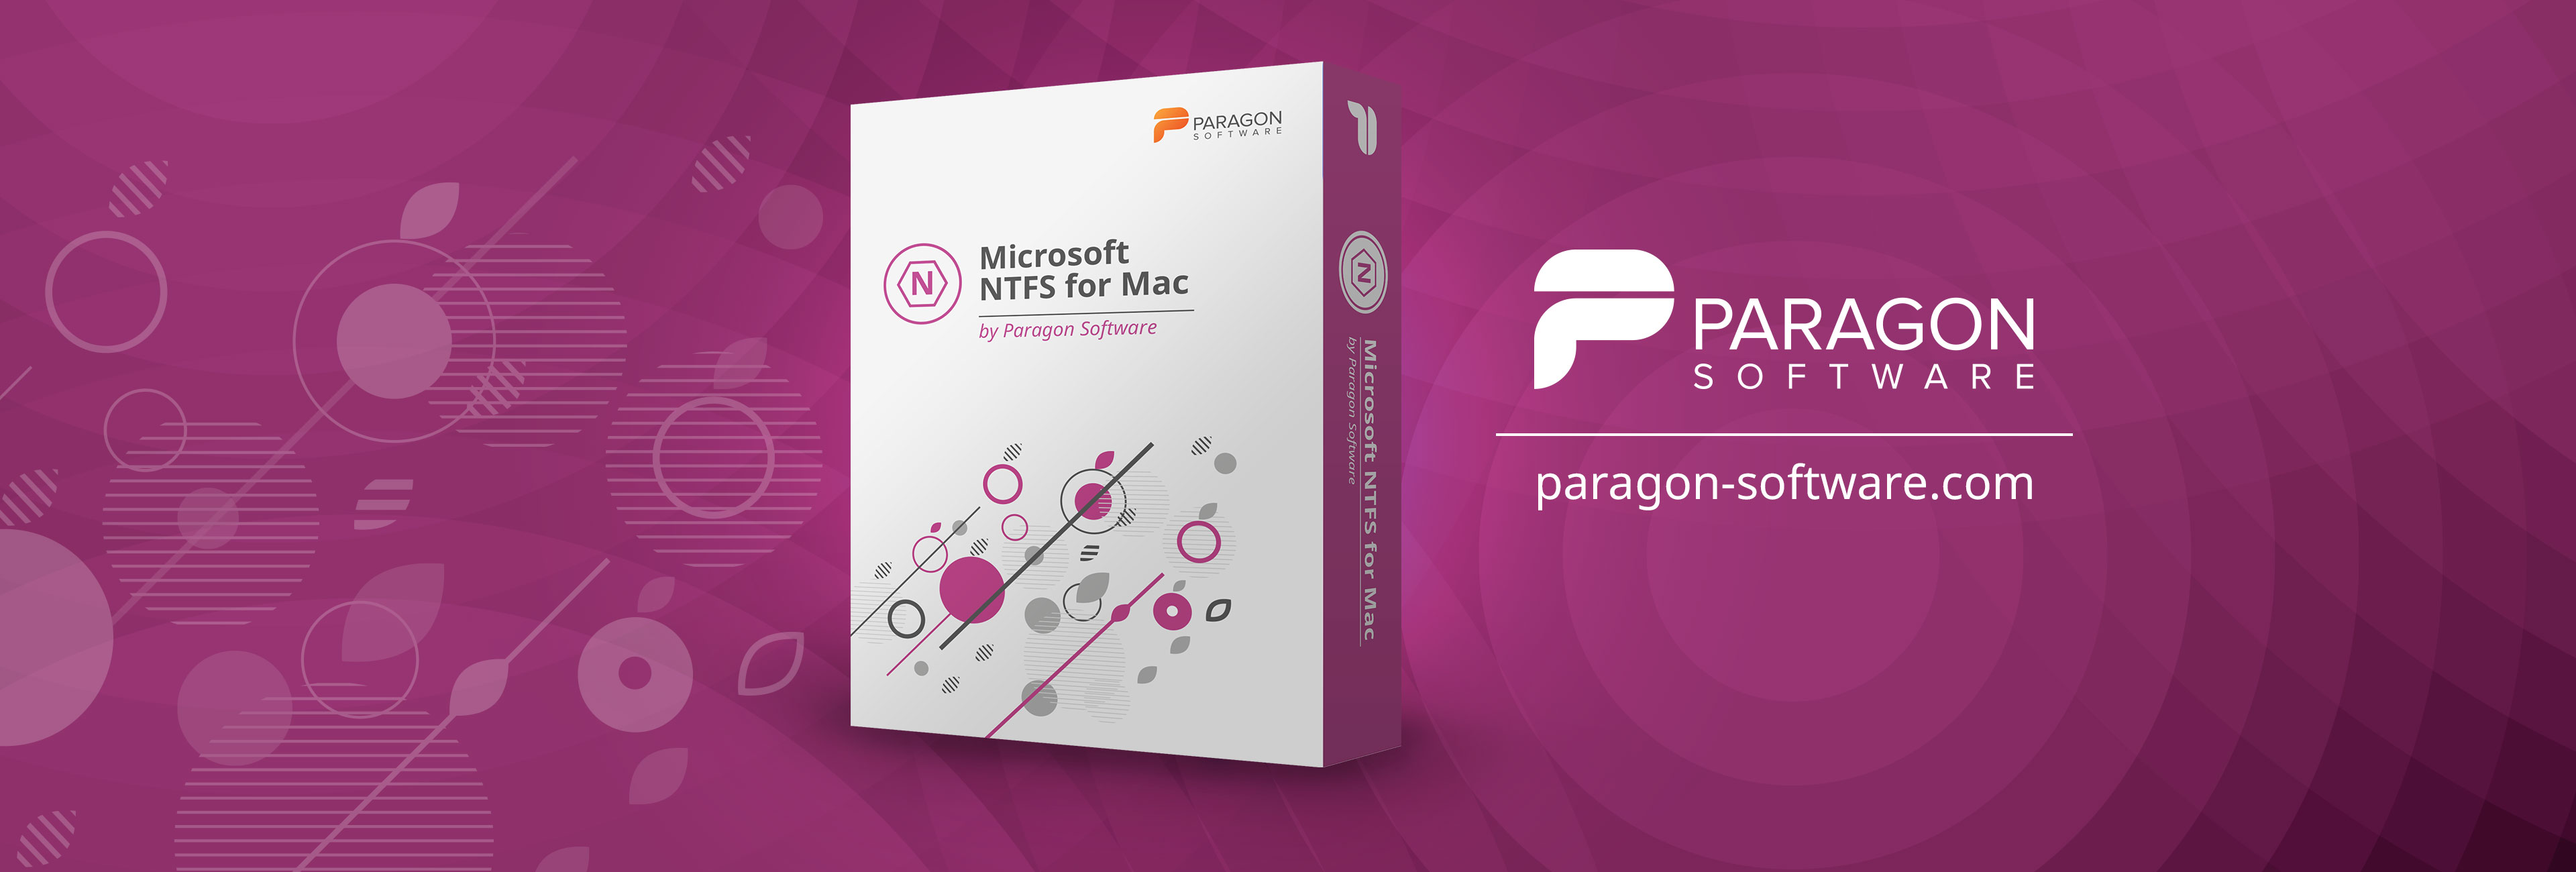 seagate ntfs driver for mac not working